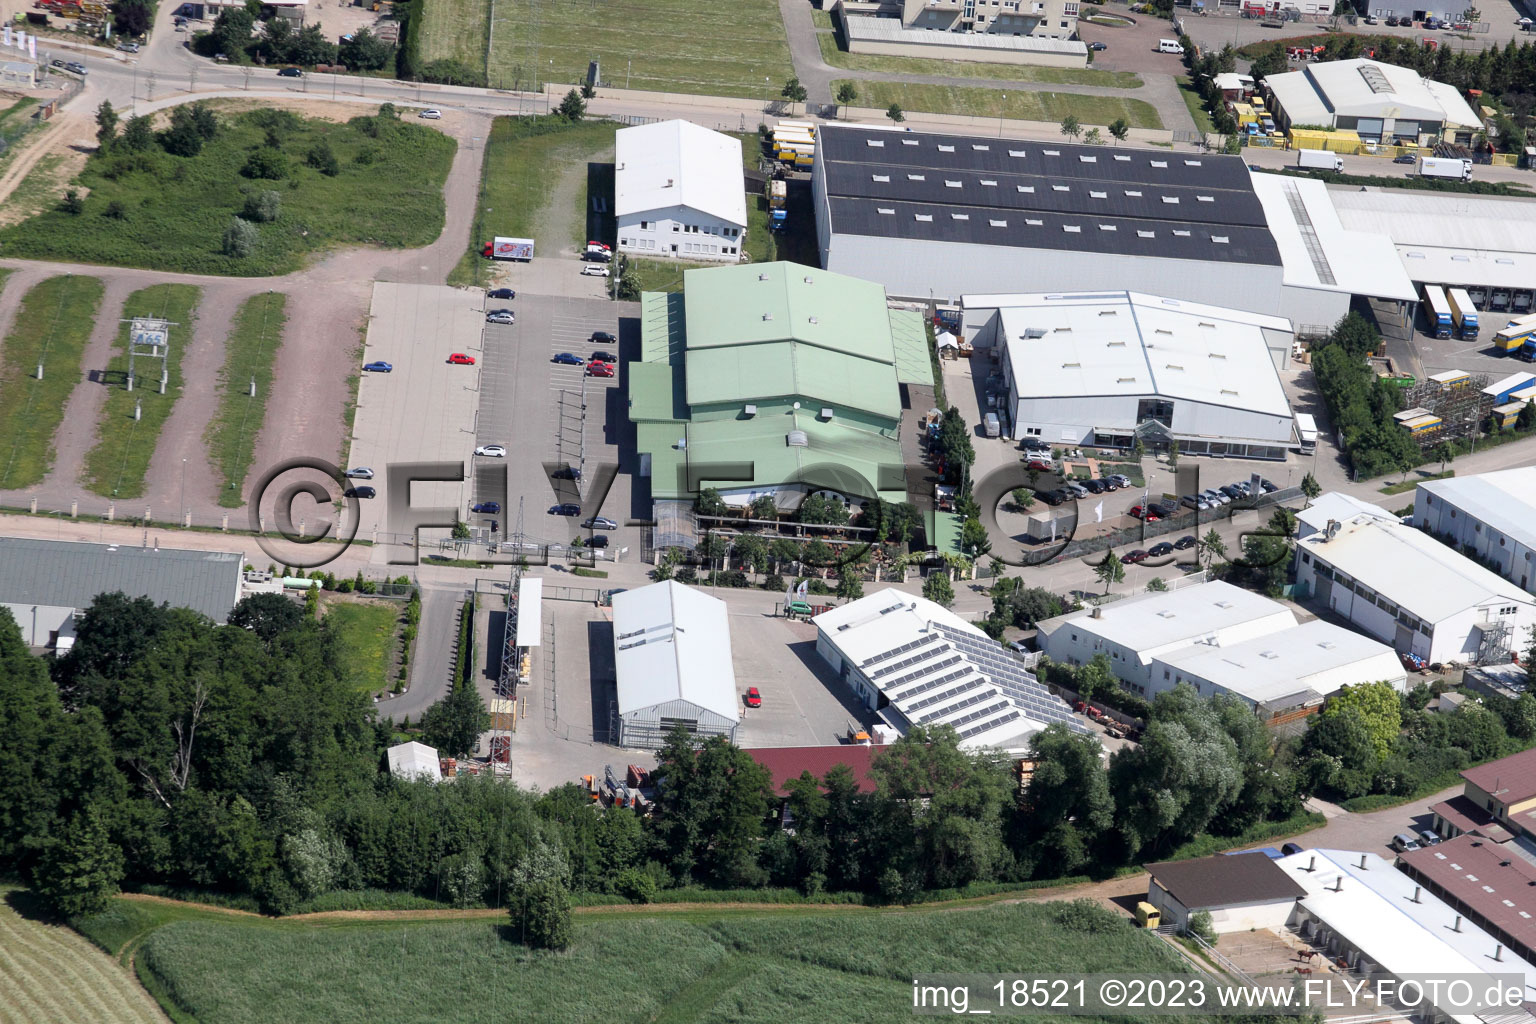 Drone recording of Coincidence logistics center in the district Minderslachen in Kandel in the state Rhineland-Palatinate, Germany